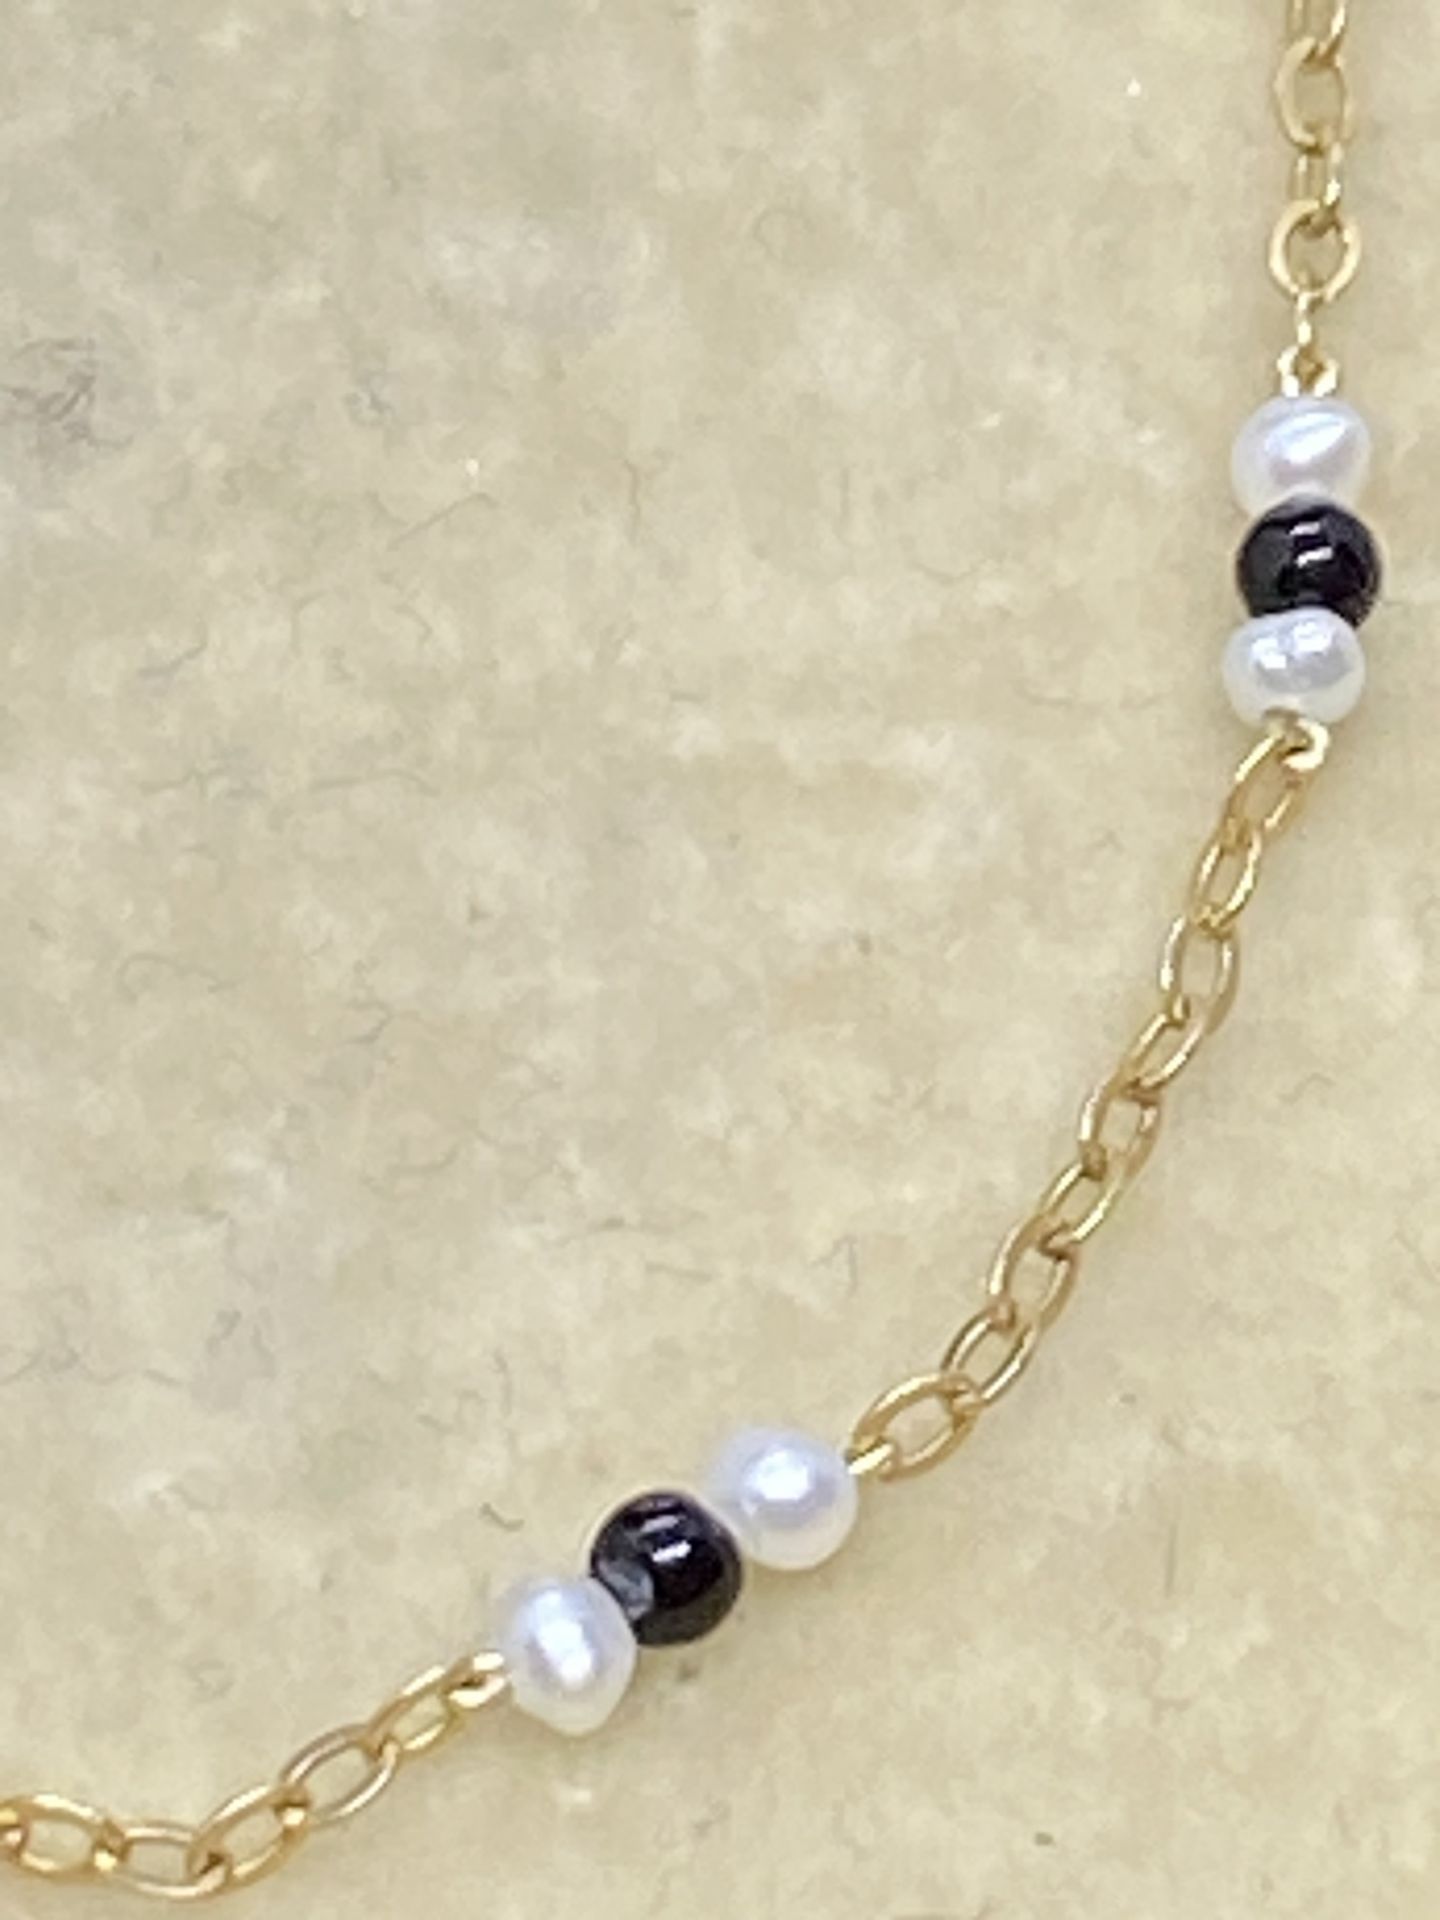 9ct GOLD ONYX & PEARL NECKLACE - Image 3 of 3